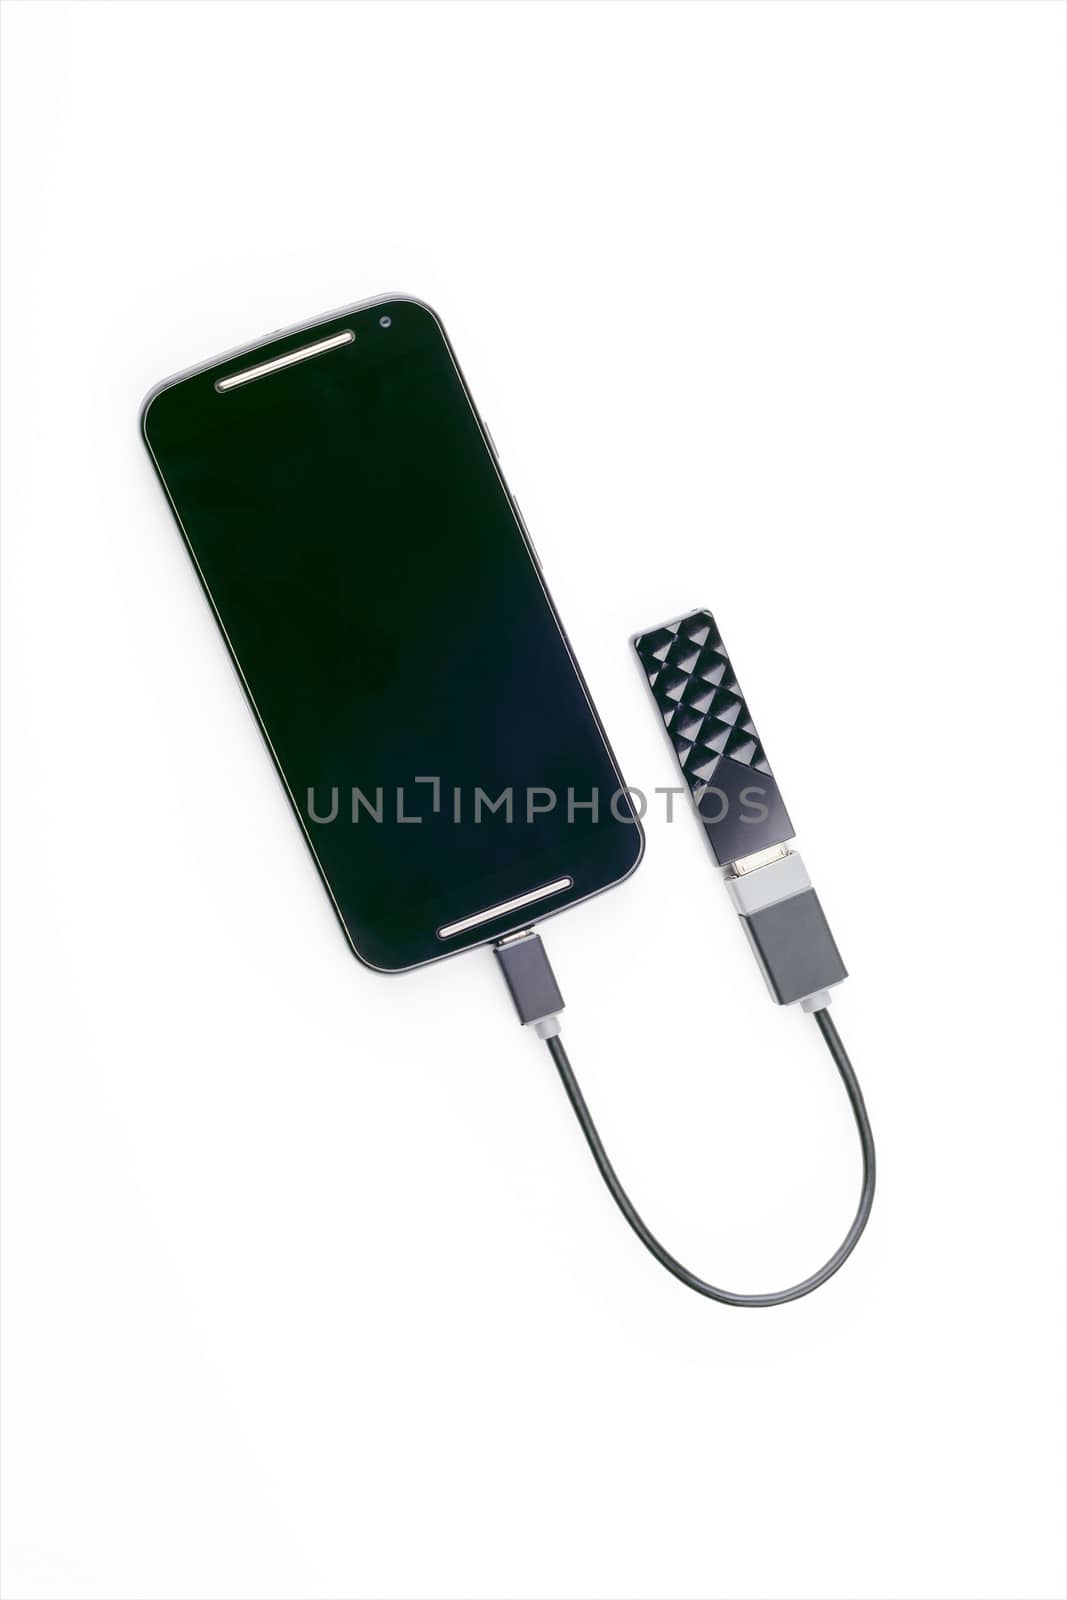 Smartphone connected to a USB key with an OTG cable by MaxalTamor